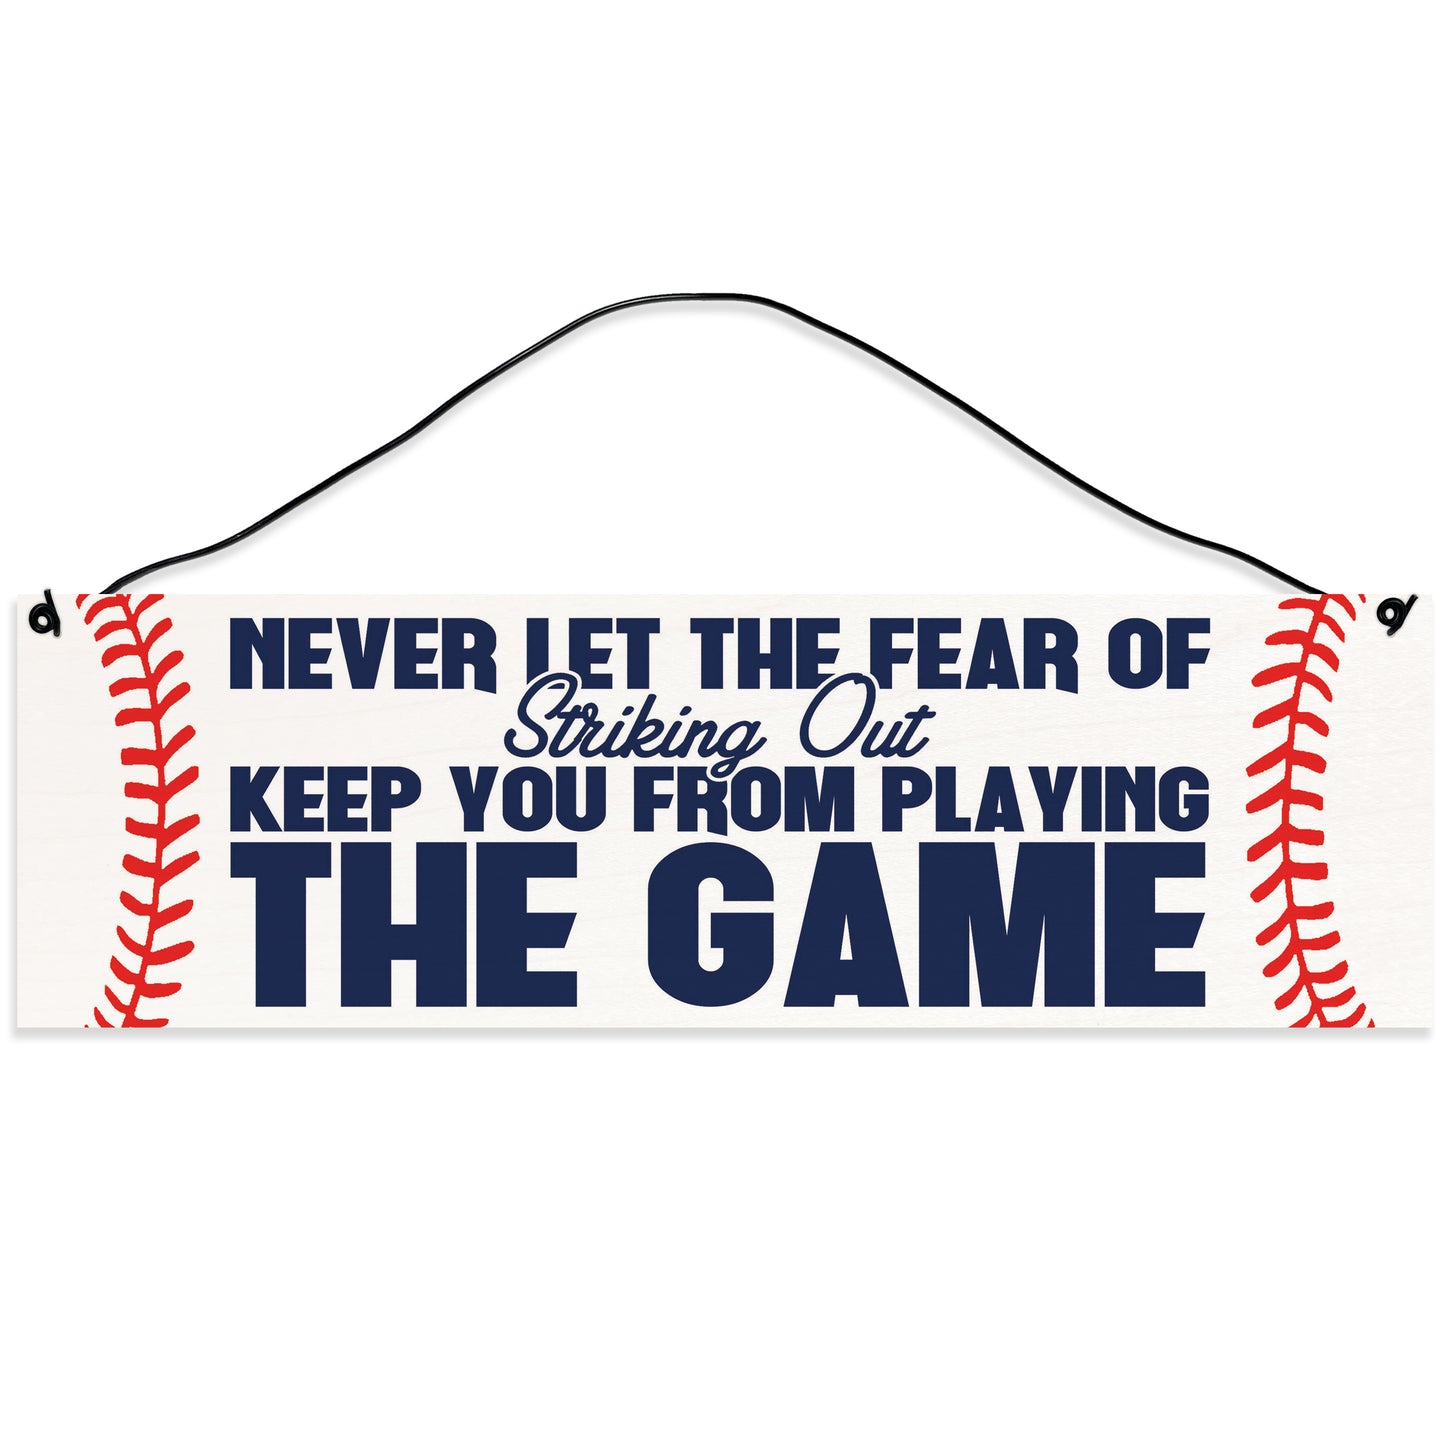 Fear of Striking Out. Baseball.